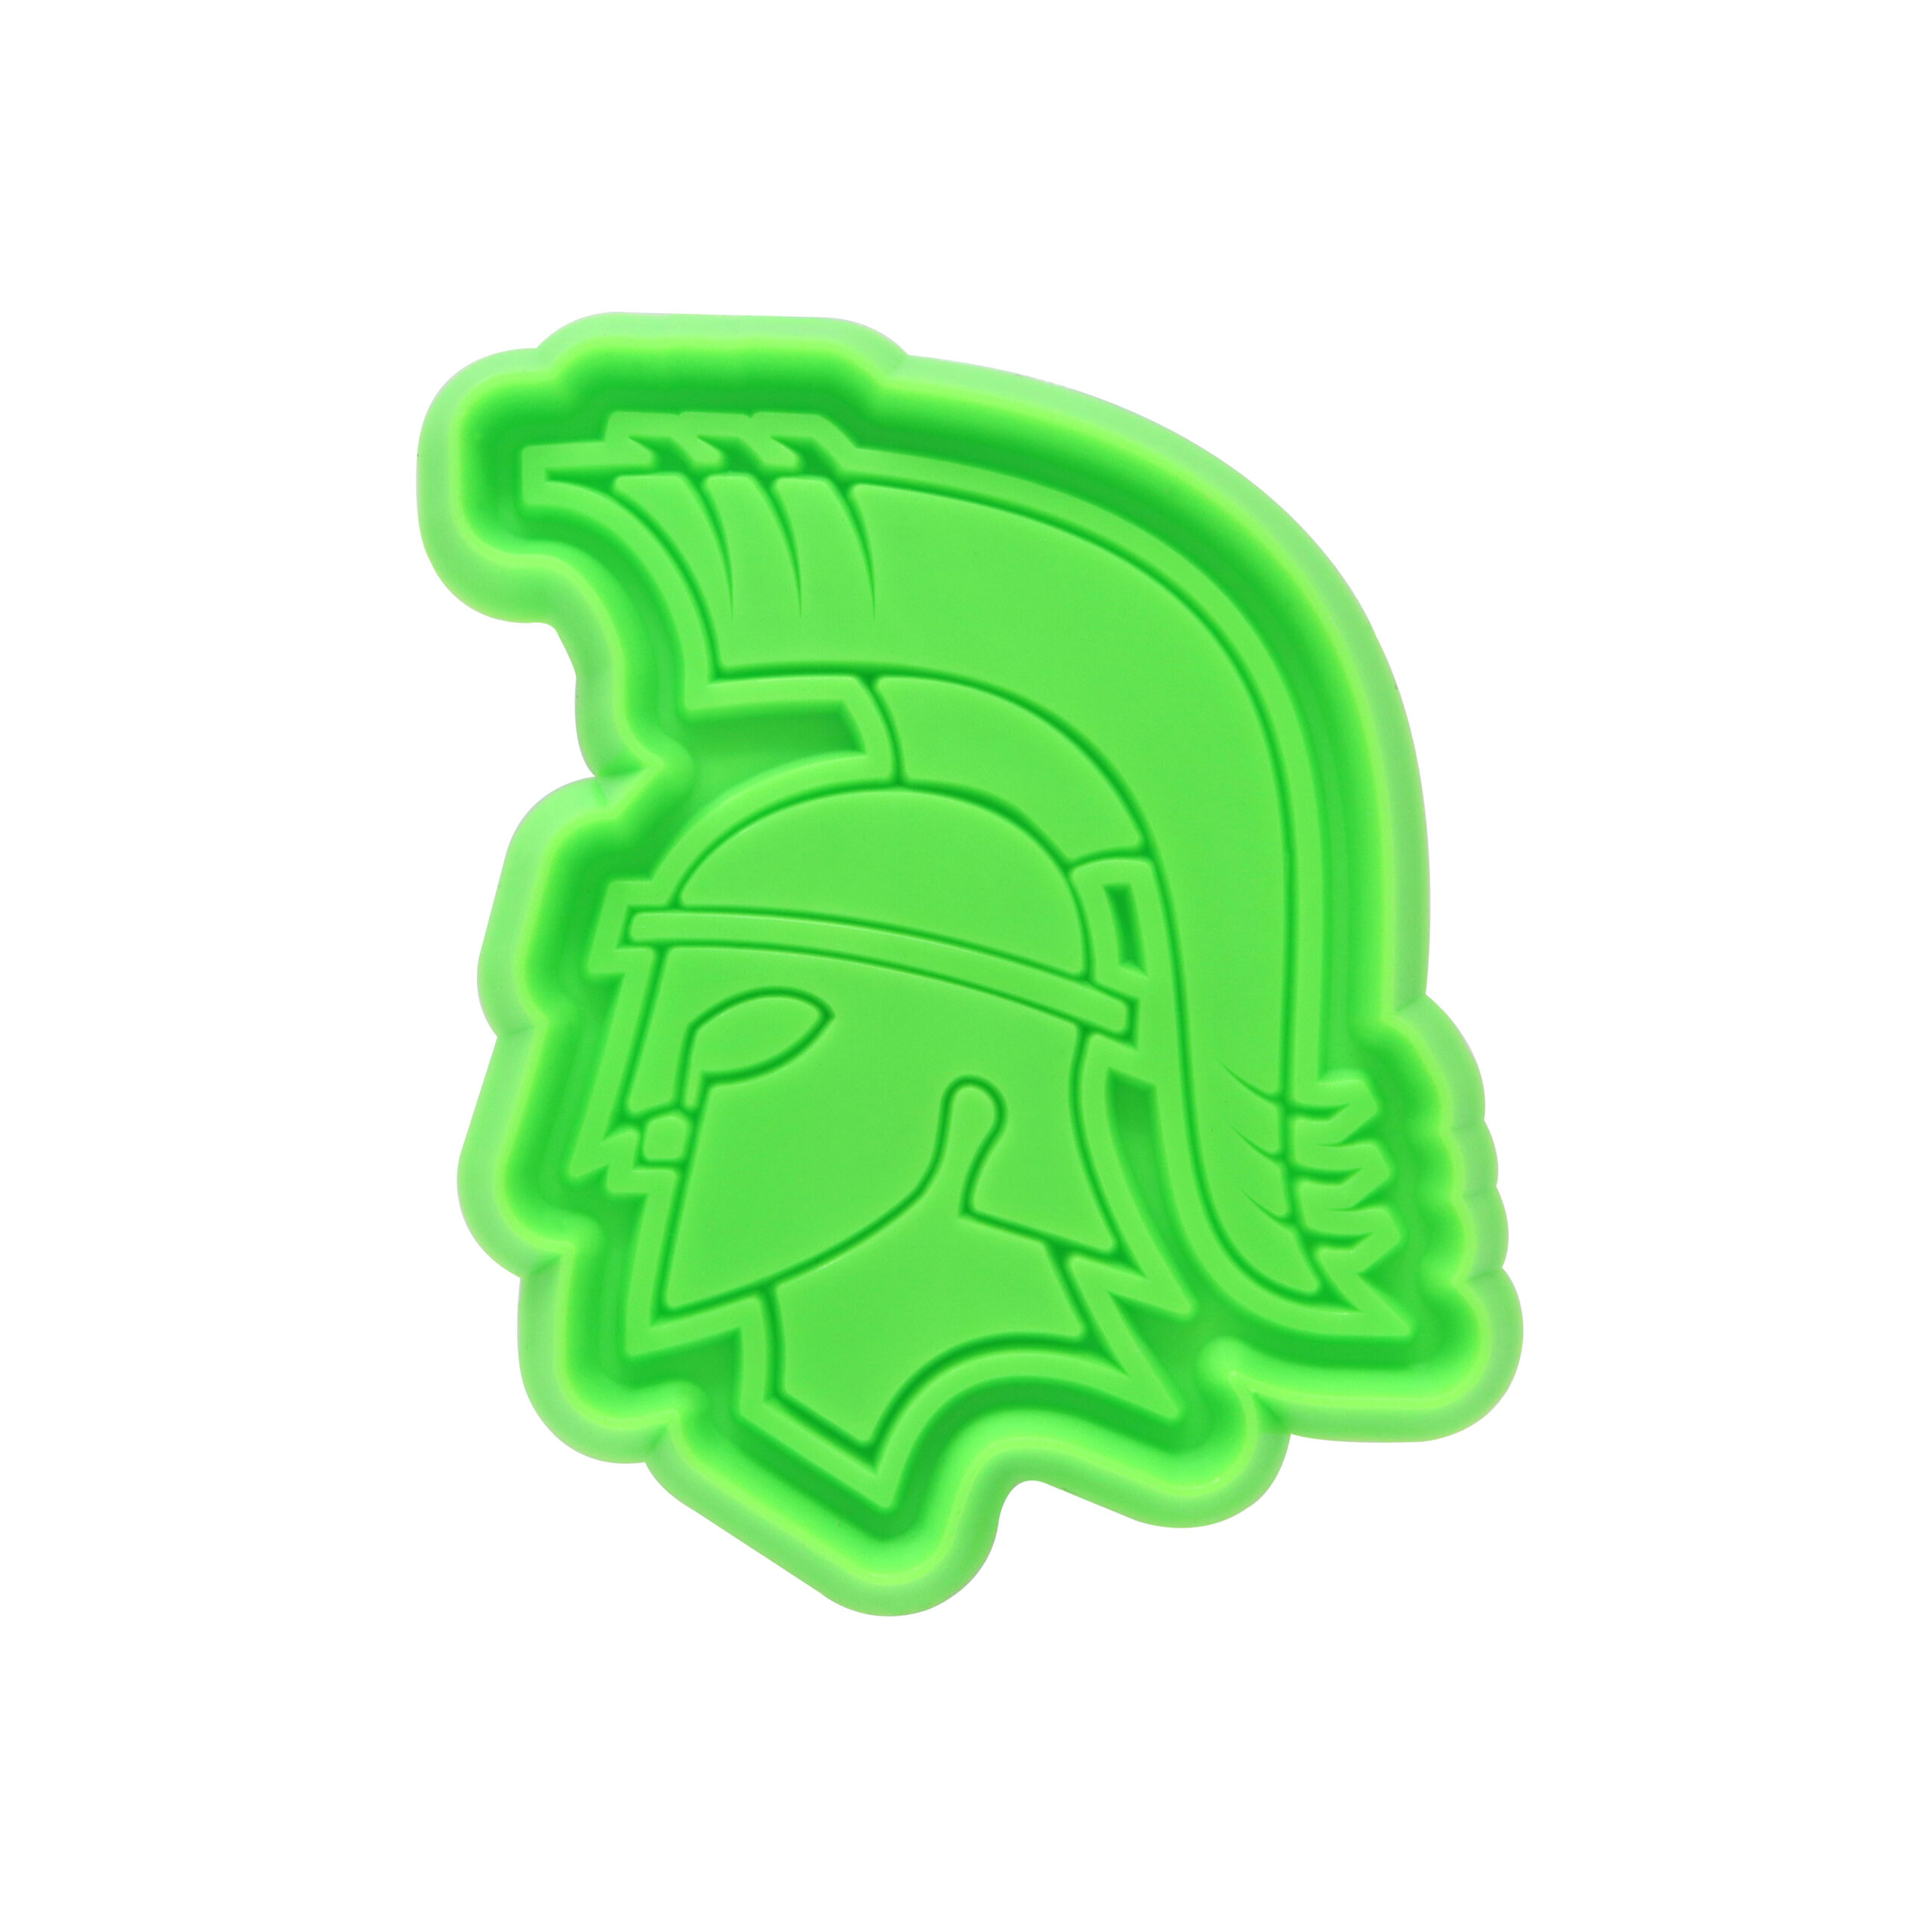 Bright Green Knight shaped cookie press